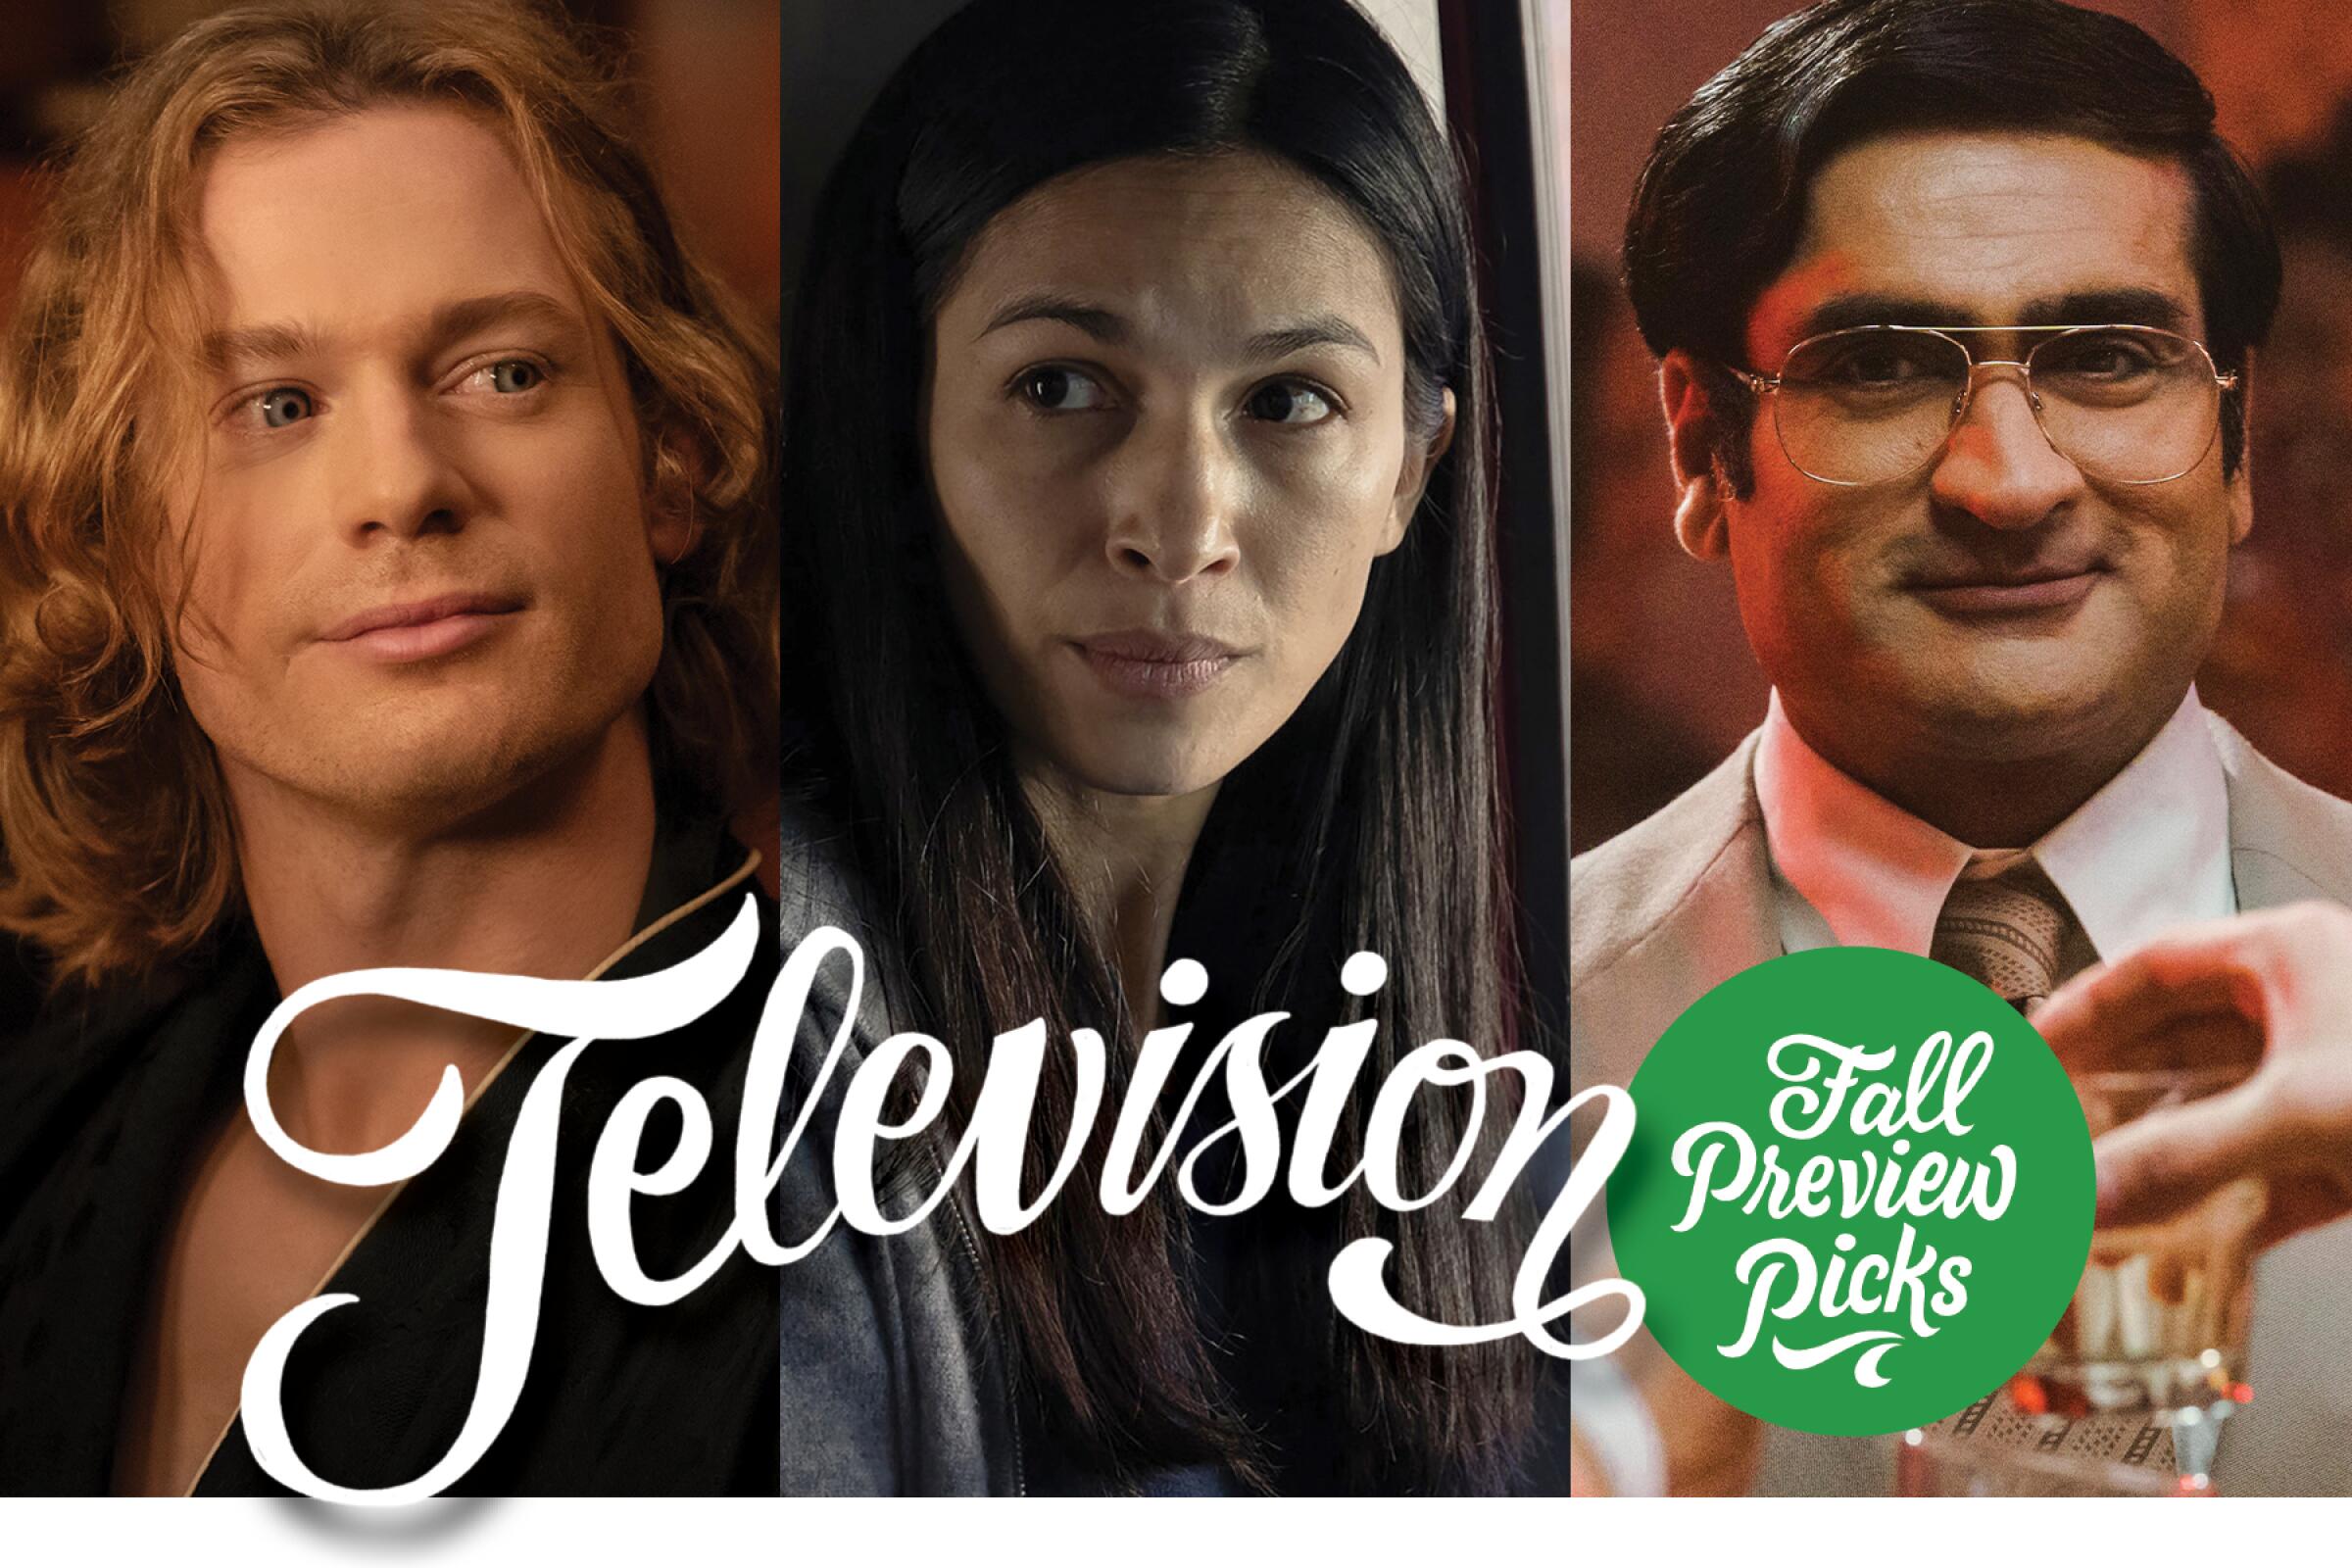 Art with two men flanking a woman and the words "Television: Fall Preview Picks"